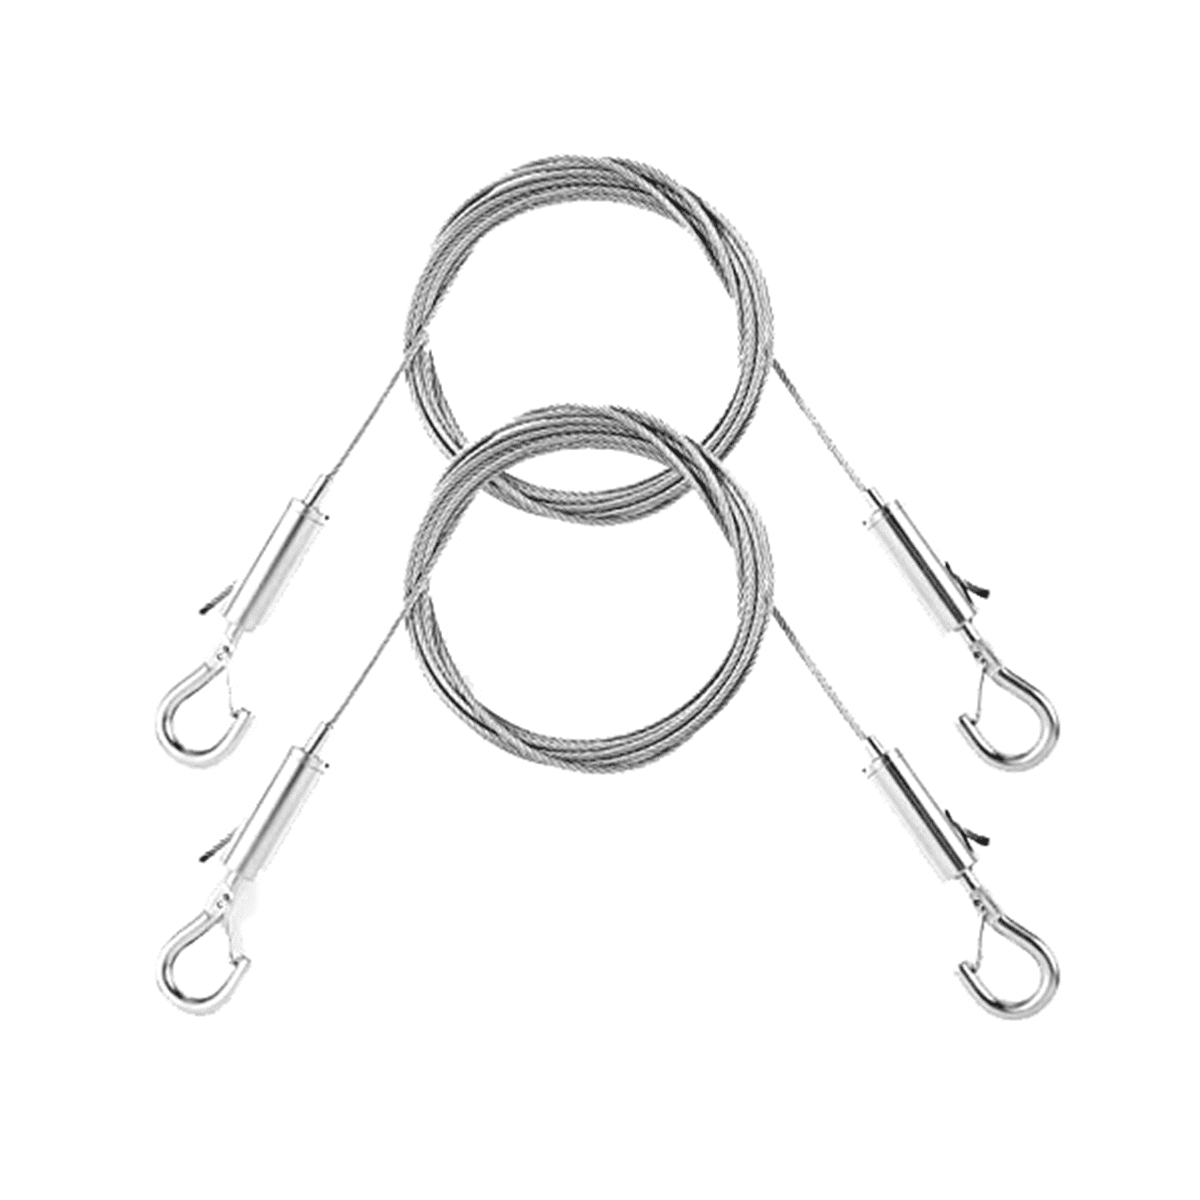 Adjustable Picture-Hanging Kit